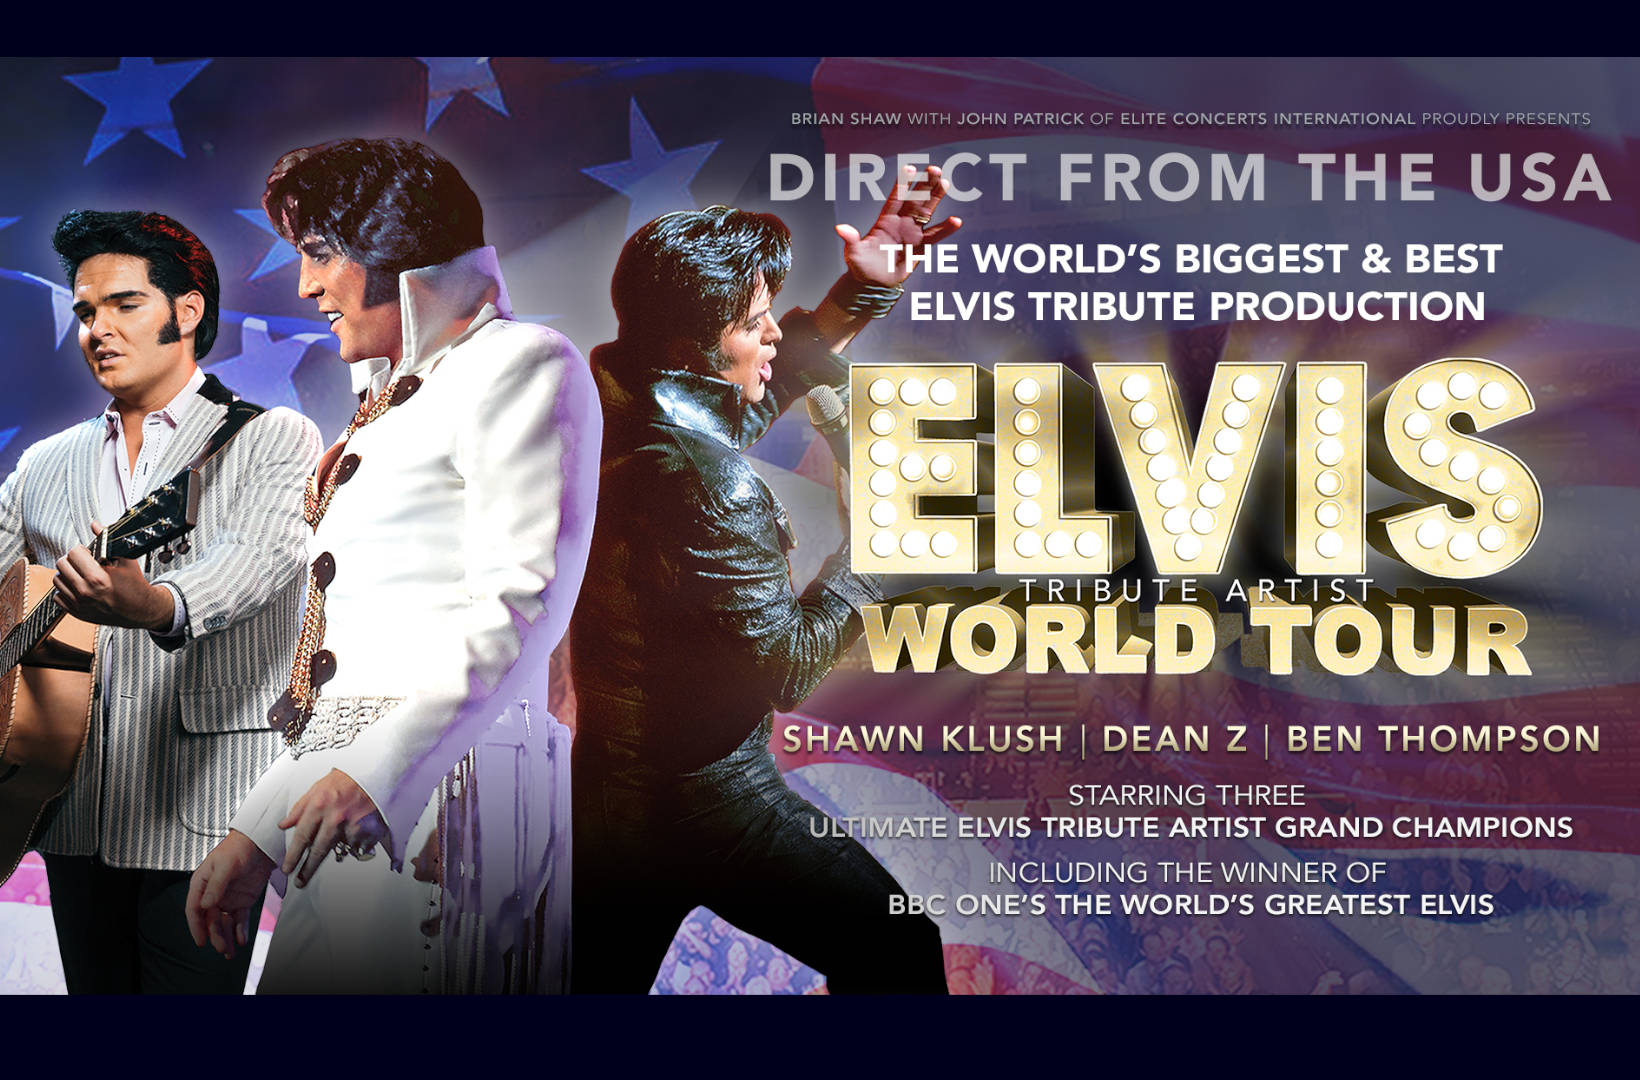 The Elvis Tribute Artist World Tour What's On Reading